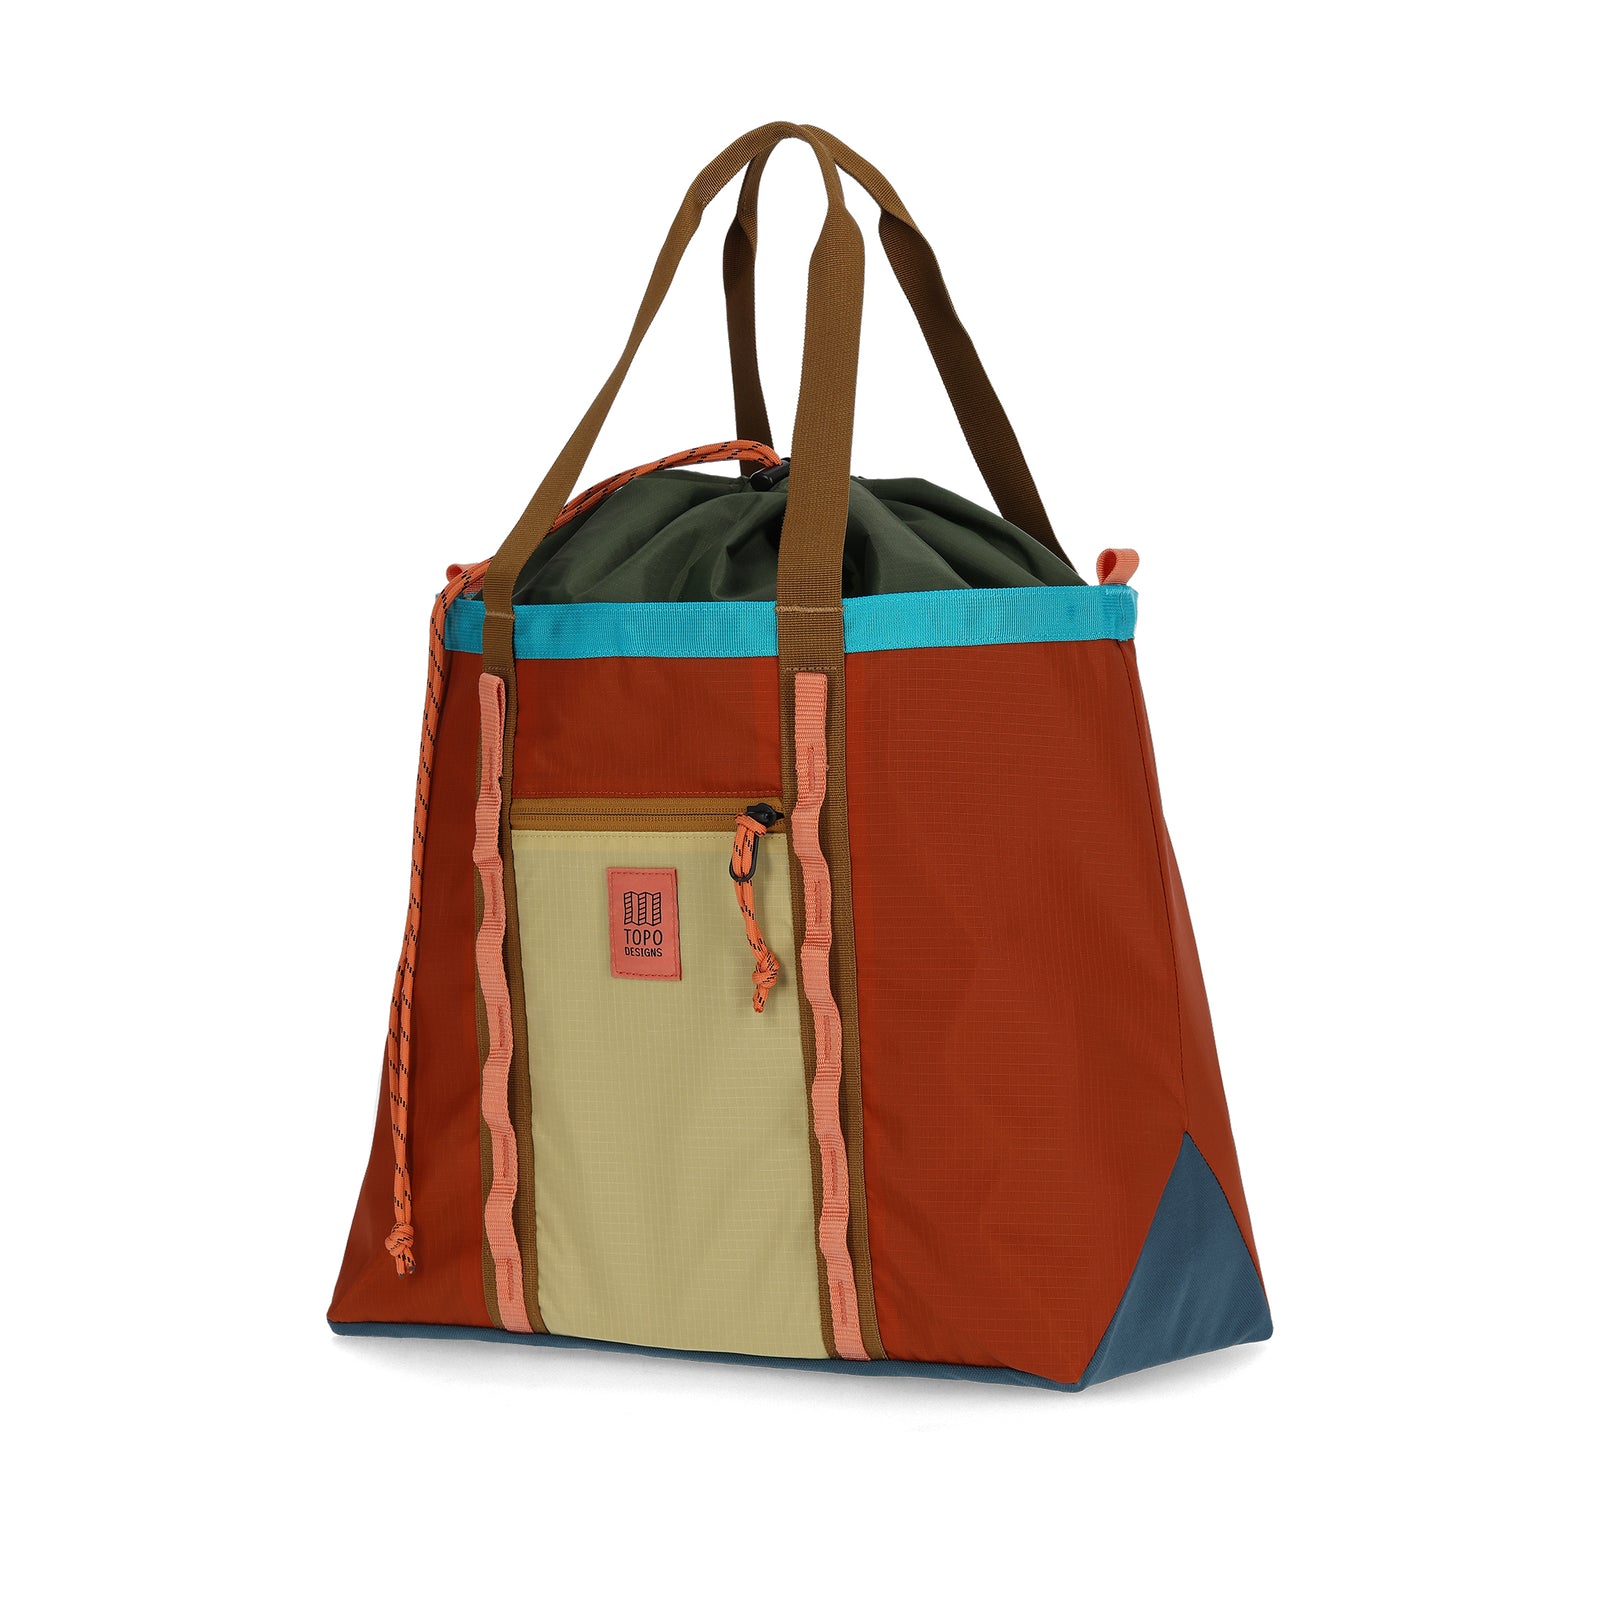 Front View of Topo Designs Mountain Utility Tote in "Clay / Hemp"